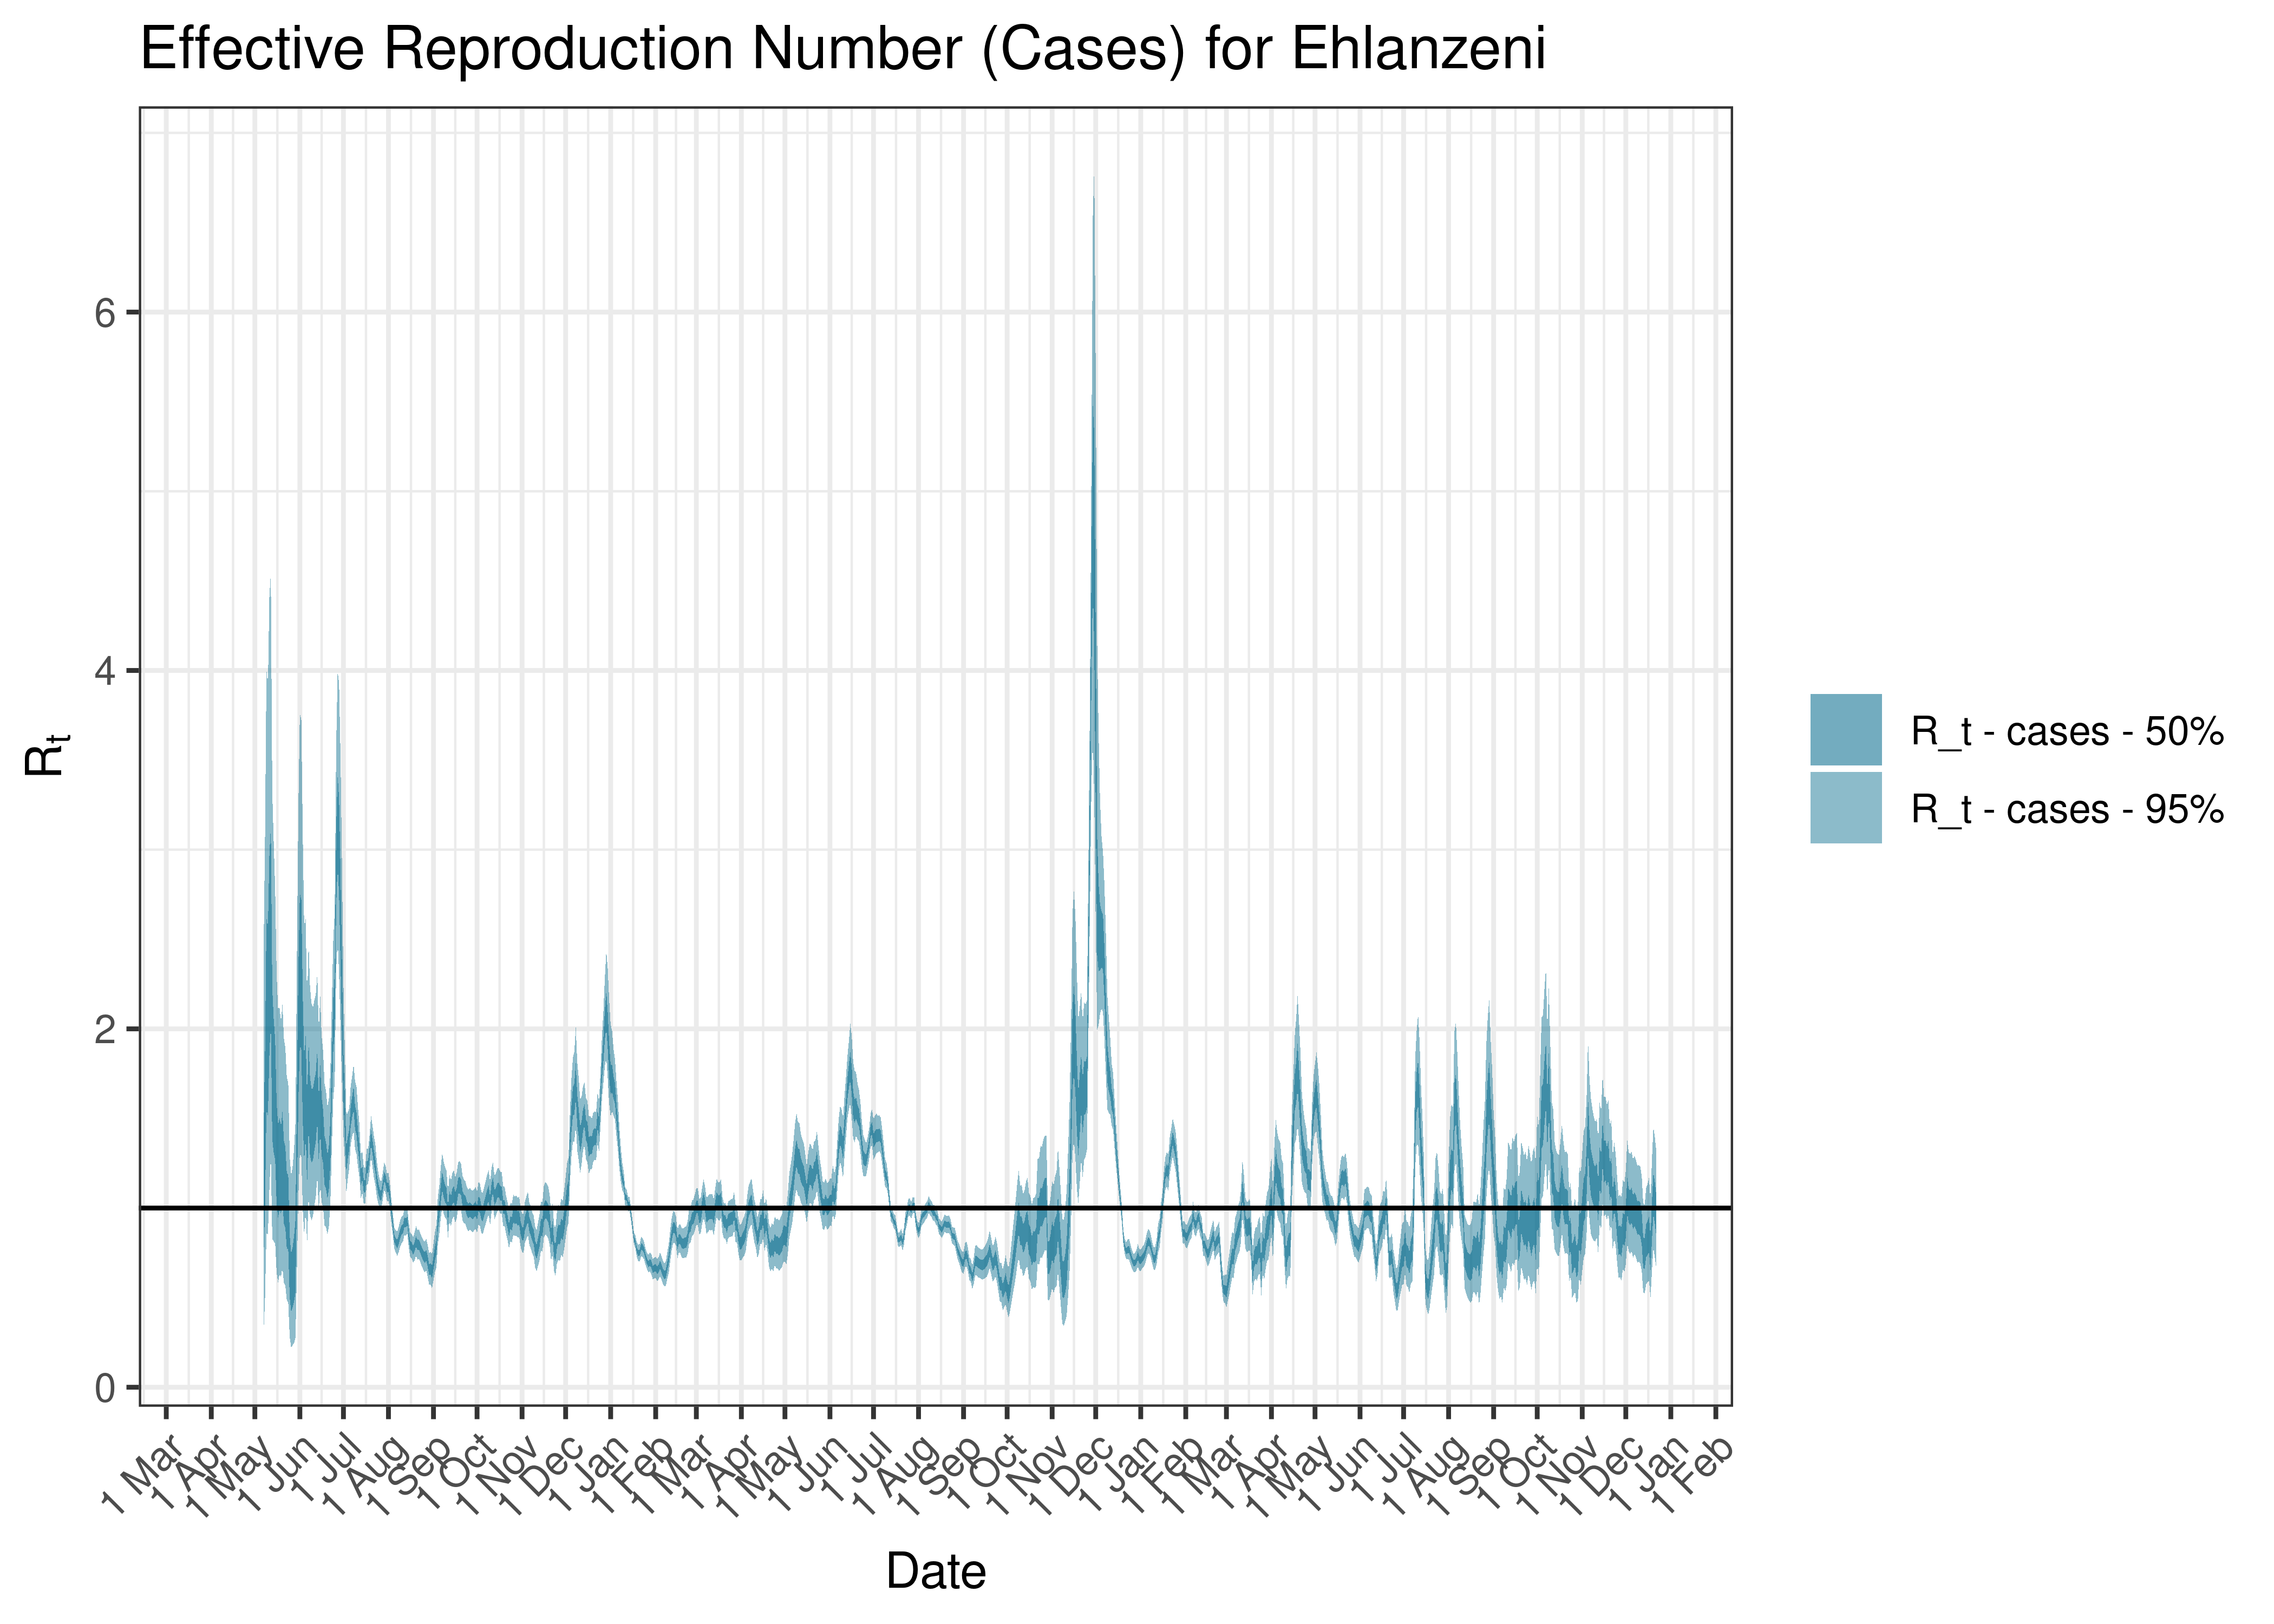 Estimated Effective Reproduction Number Based on Cases for Ehlanzeni since 1 April 2020